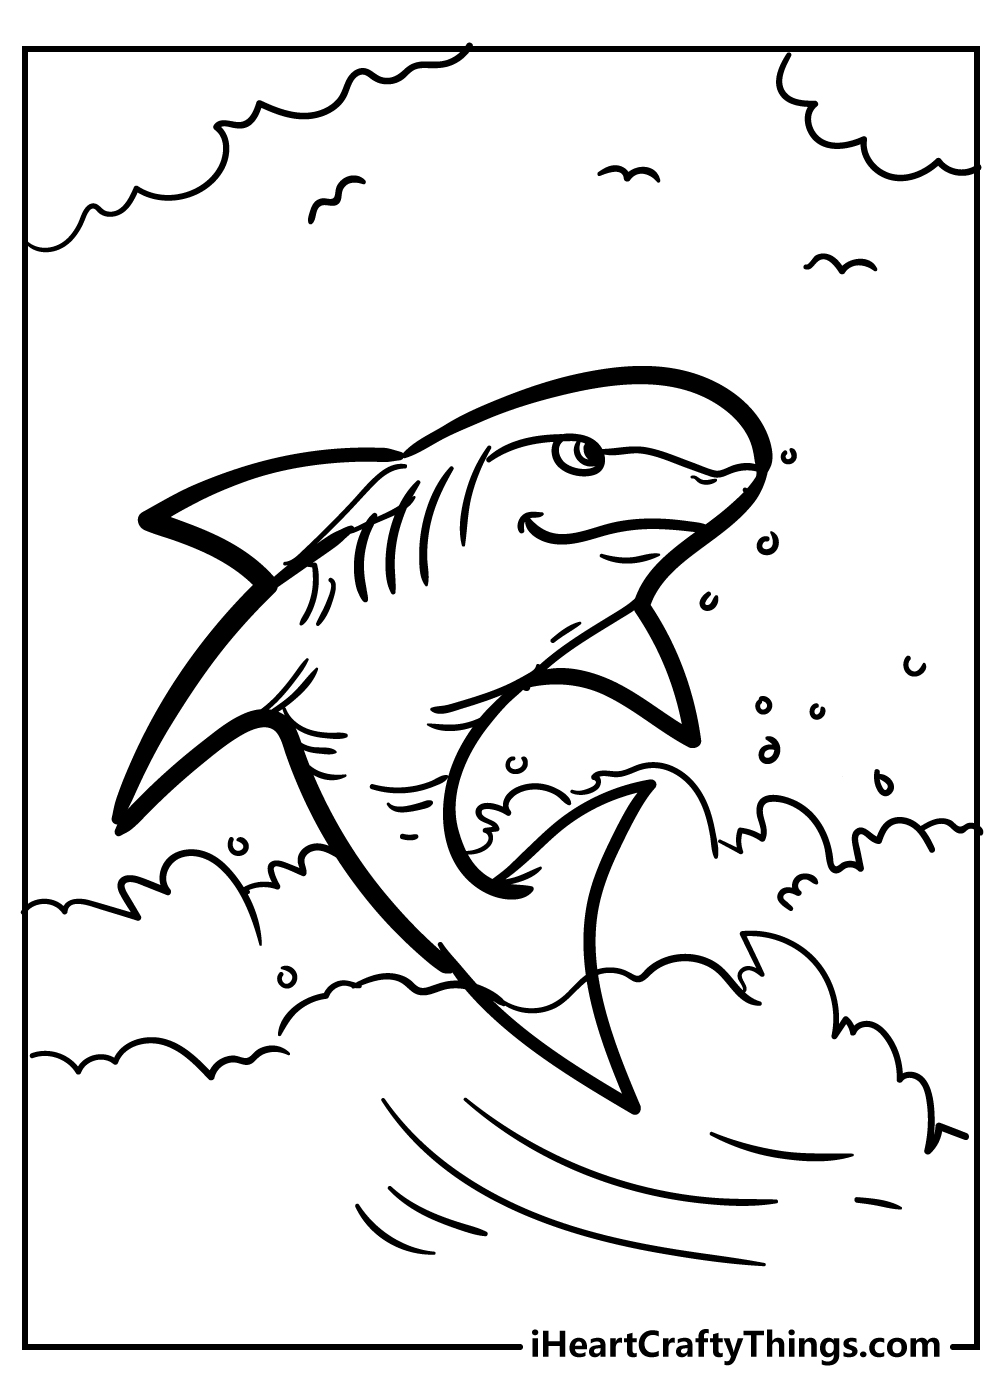 20 Shark Coloring Pages Updated 20